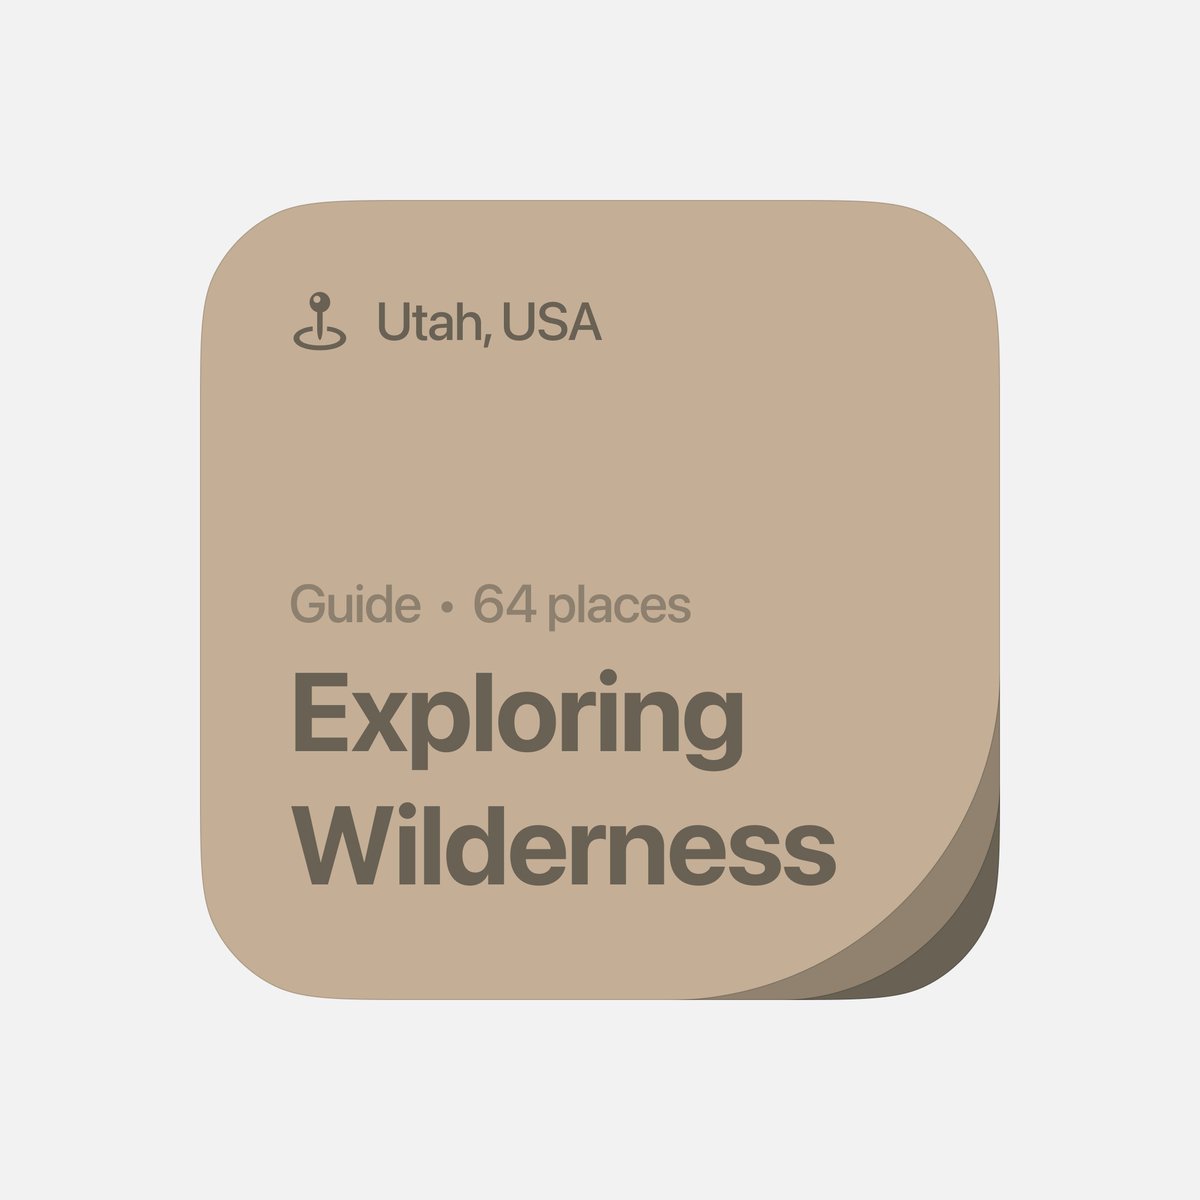 Some exploring guides!